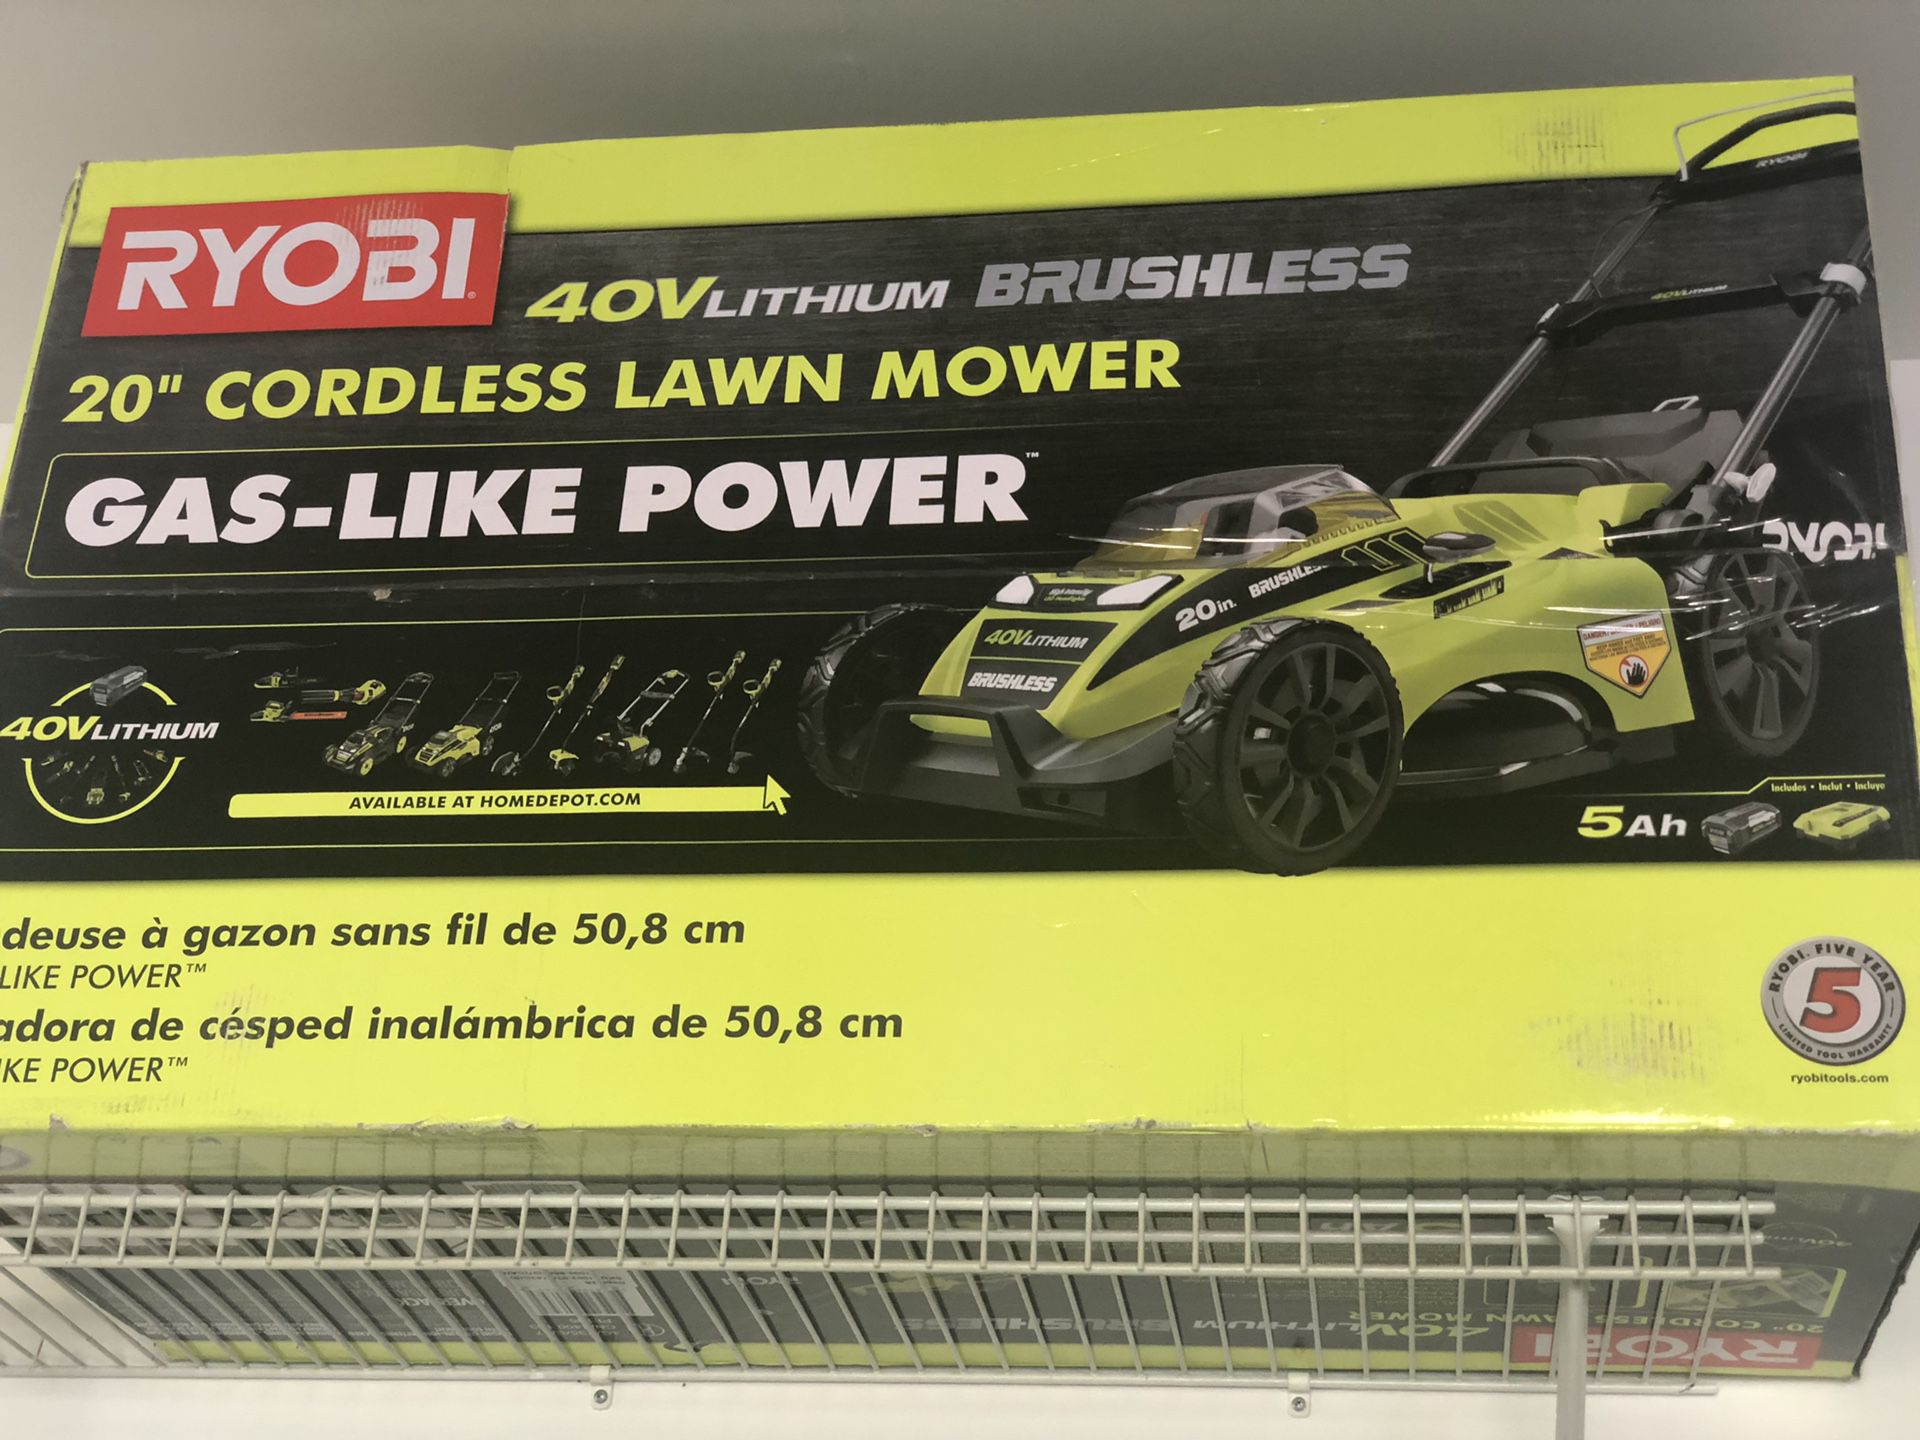 Cordless lawn mower used twice